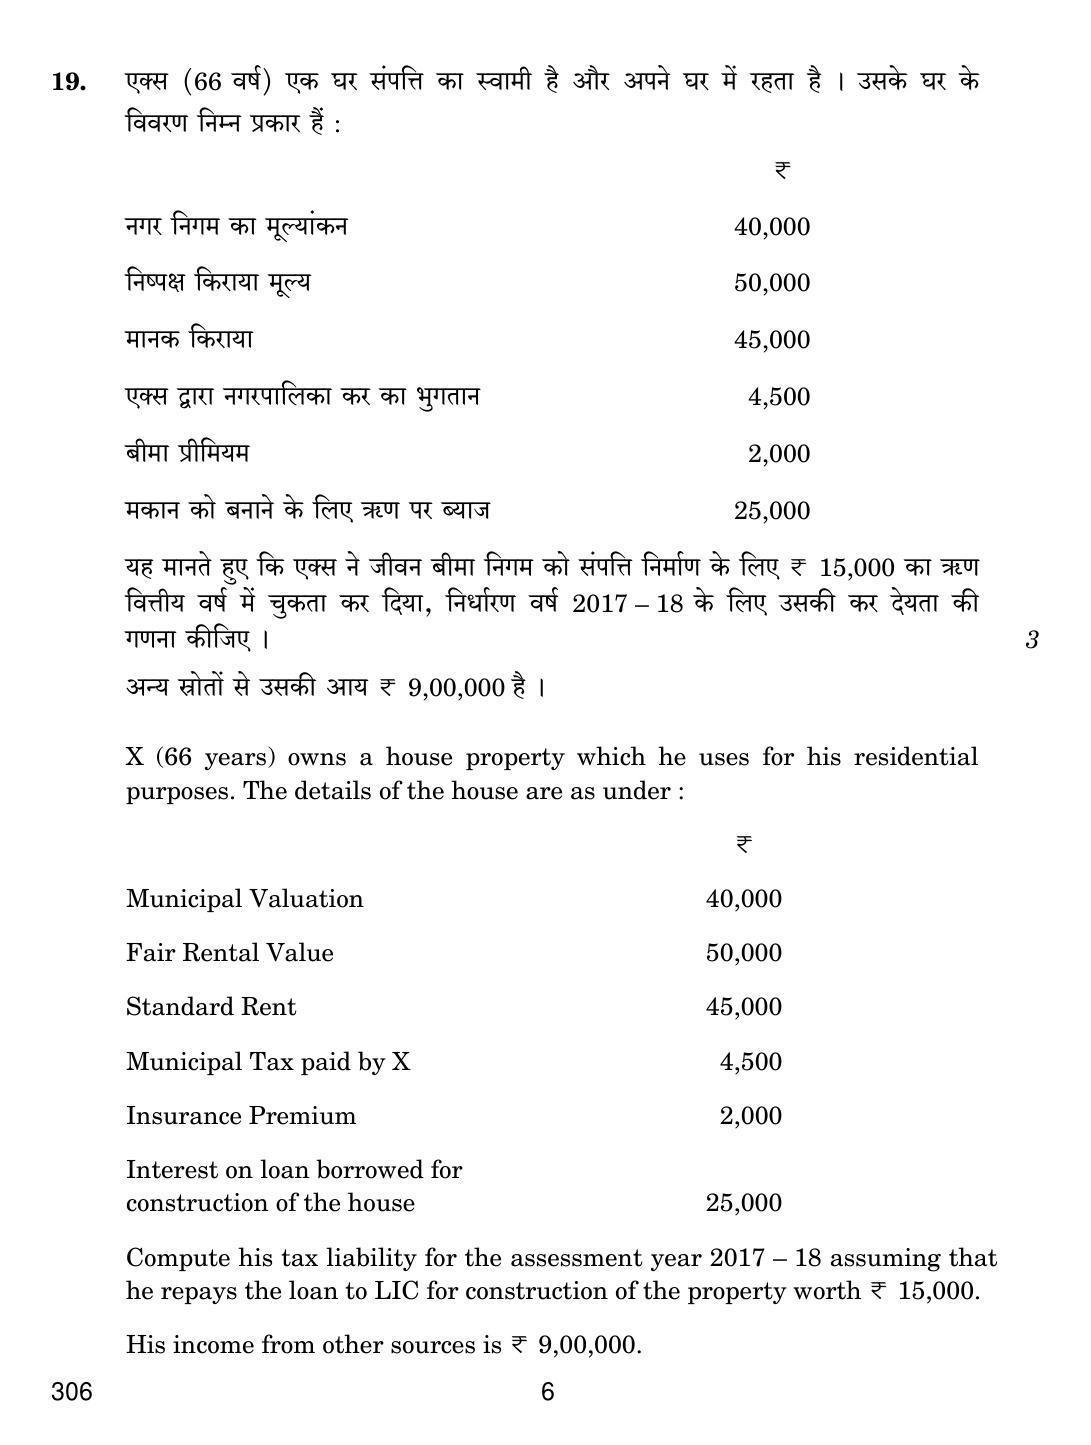 CBSE Class 12 306 TAXATION 2018 Question Paper - Page 6